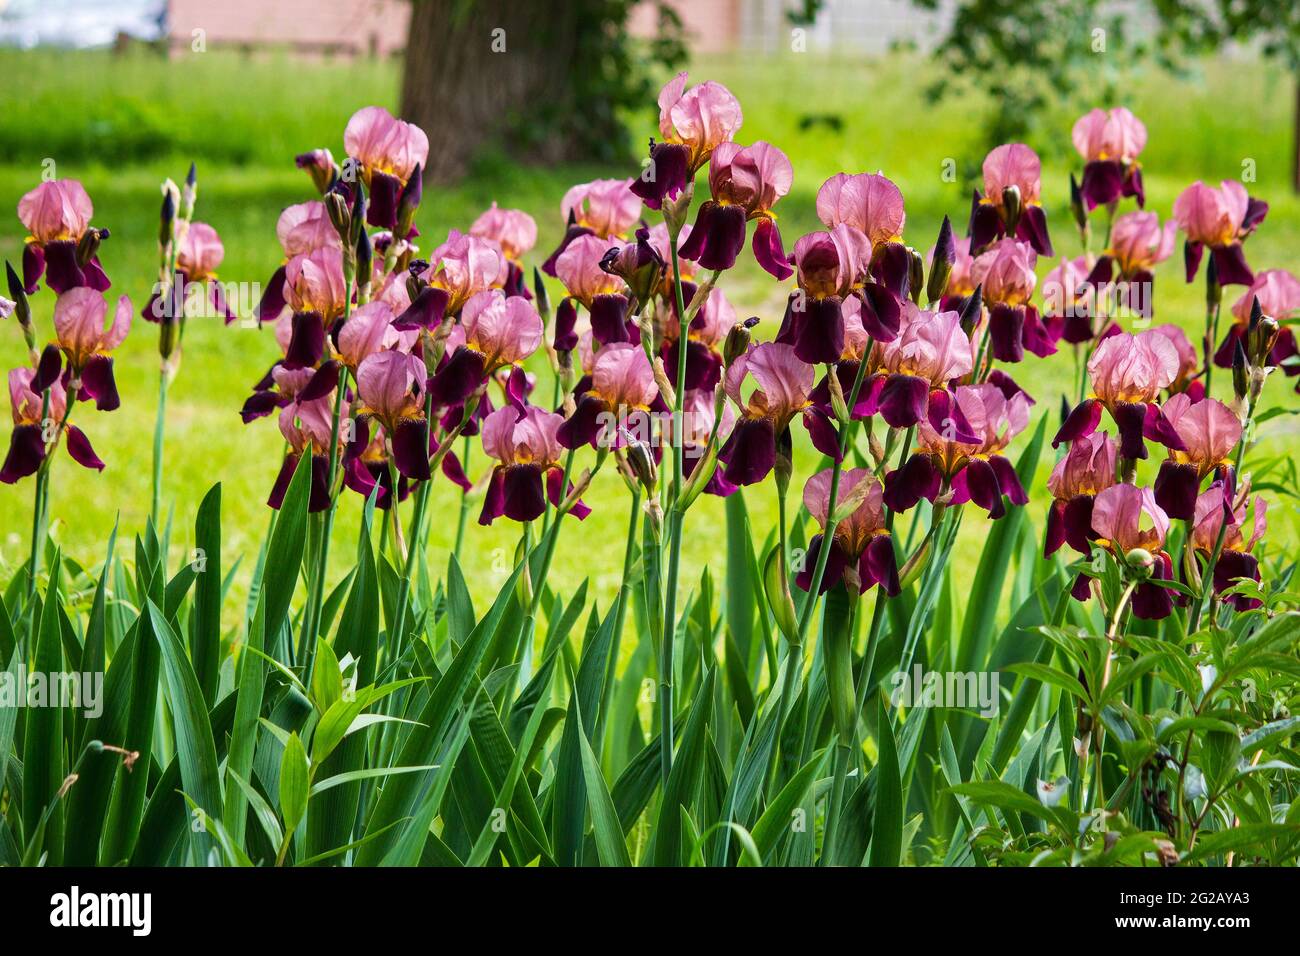 Blooming irises on a flower bed in the garden Stock Photo